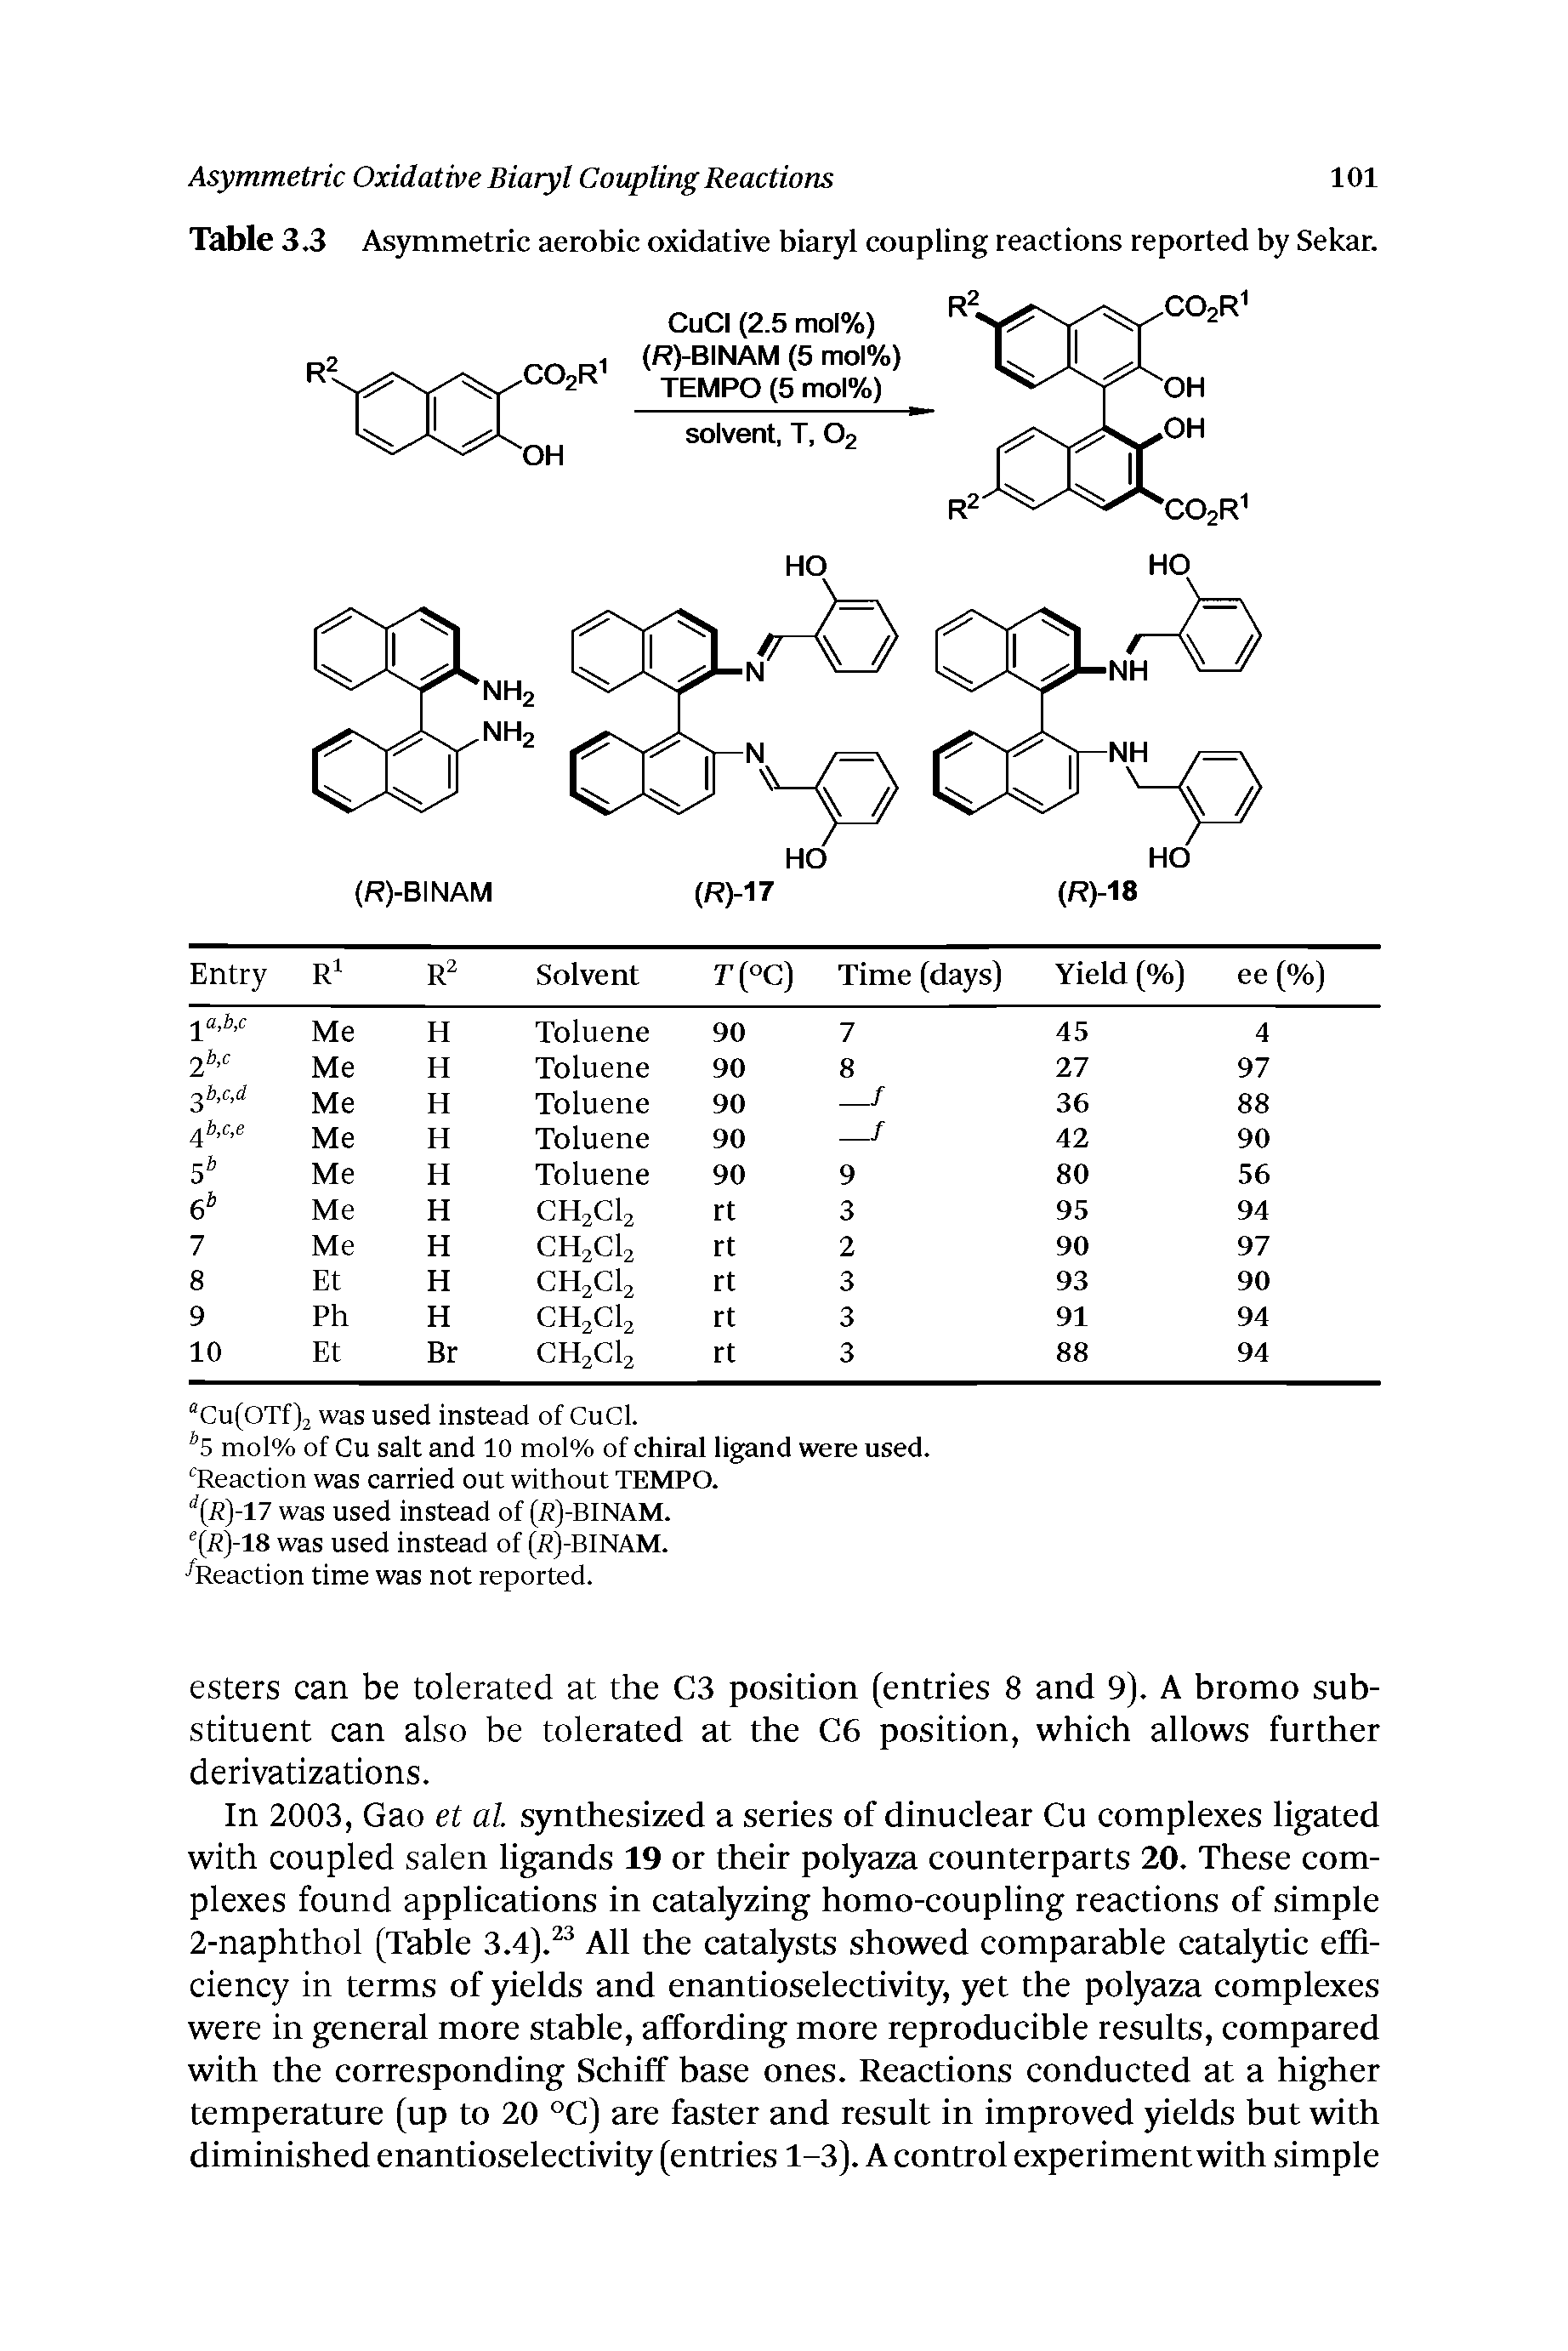 Table 3.3 Asymmetric aerobic oxidative biatyl coupling reactions reported by Sekar.